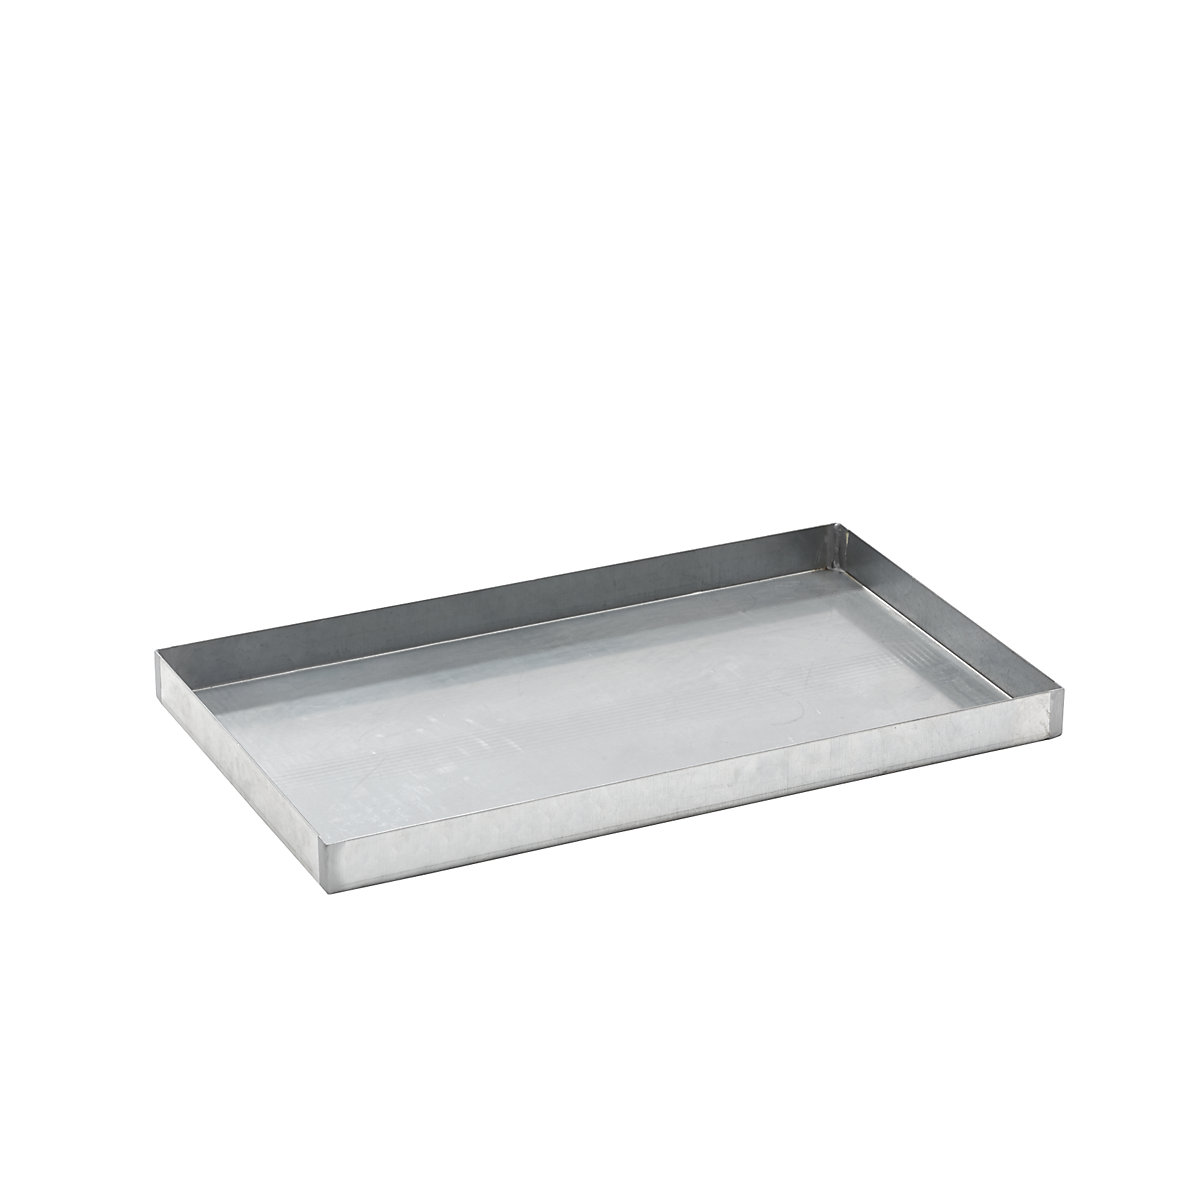 Steel sump tray for small containers – eurokraft basic